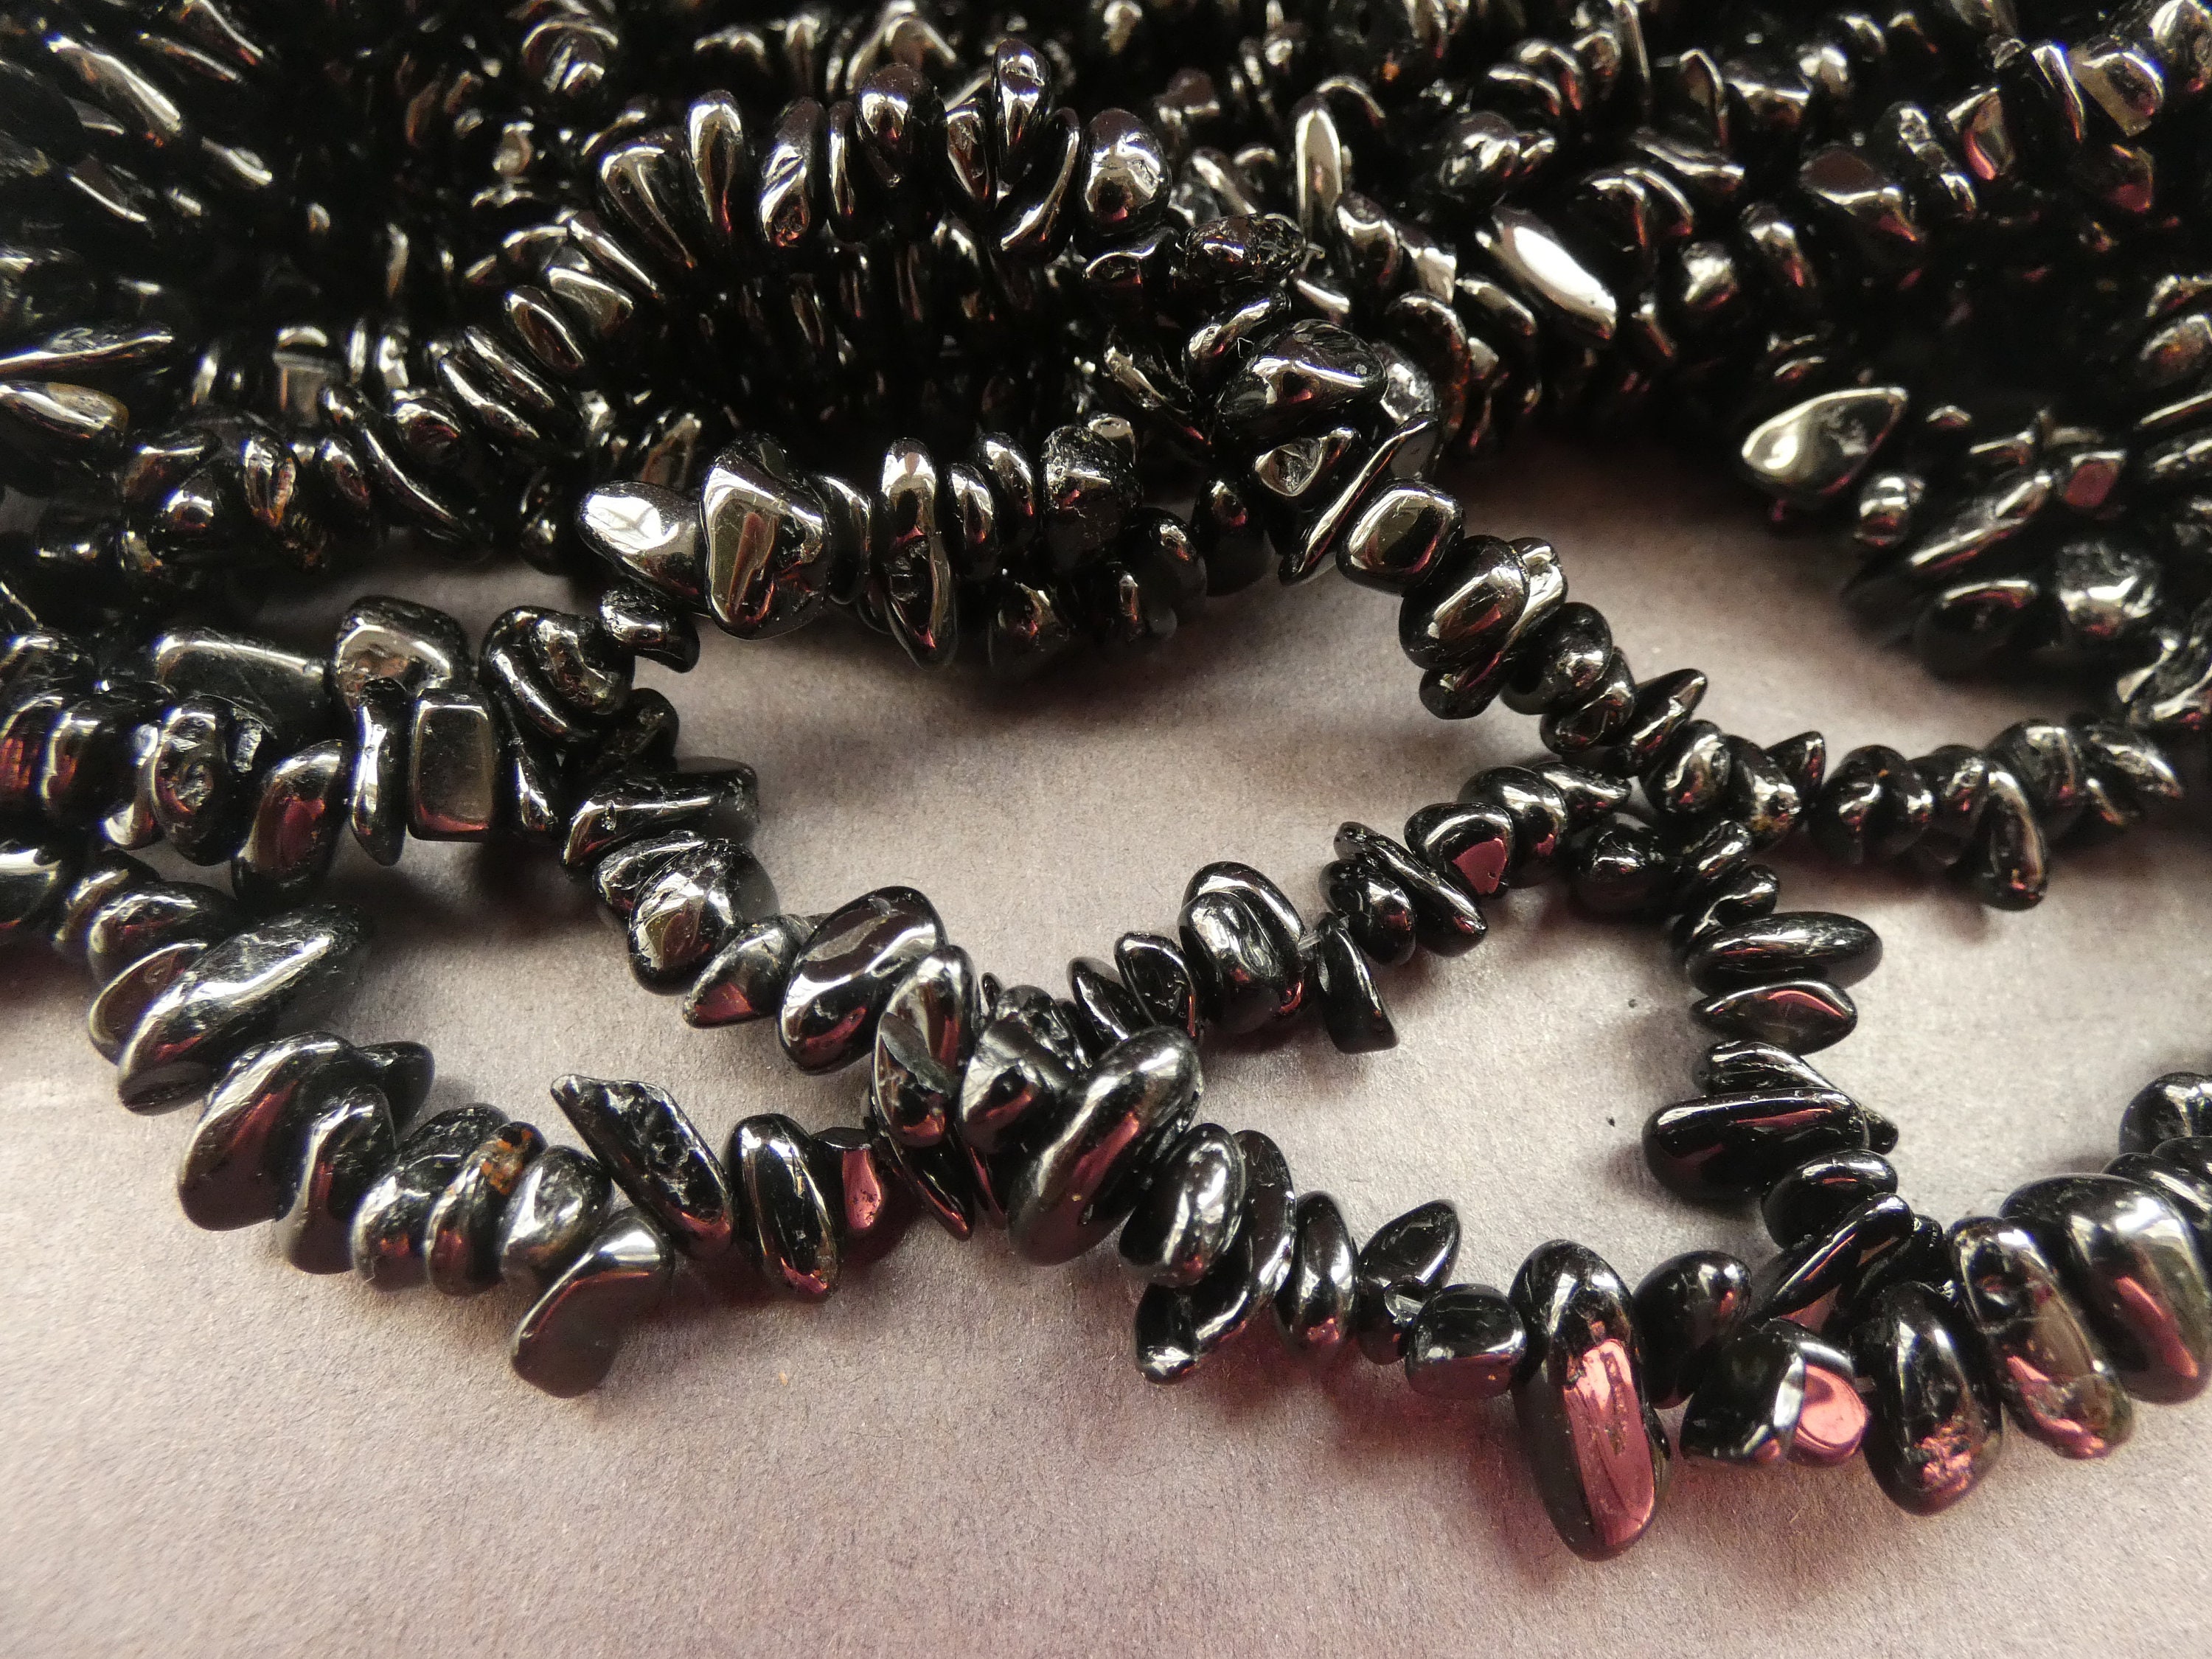 33 Inch 4-12mm Natural Black Tourmaline Bead Strand, About 250 Beads ...